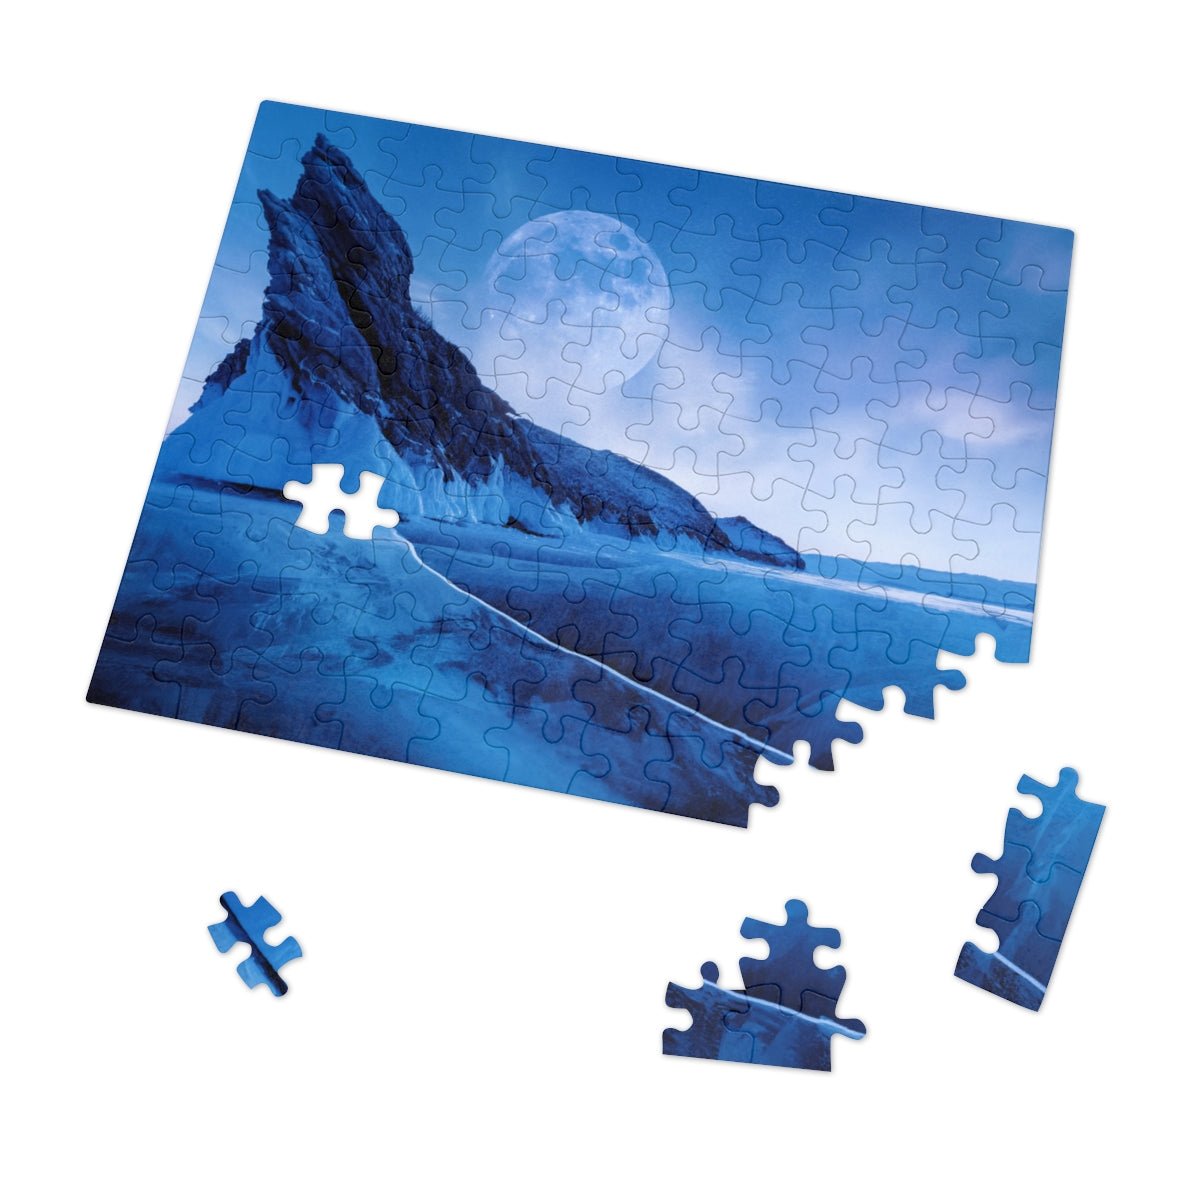 Winter Siberian Landscape Jigsaw Puzzle - Puffin Lime